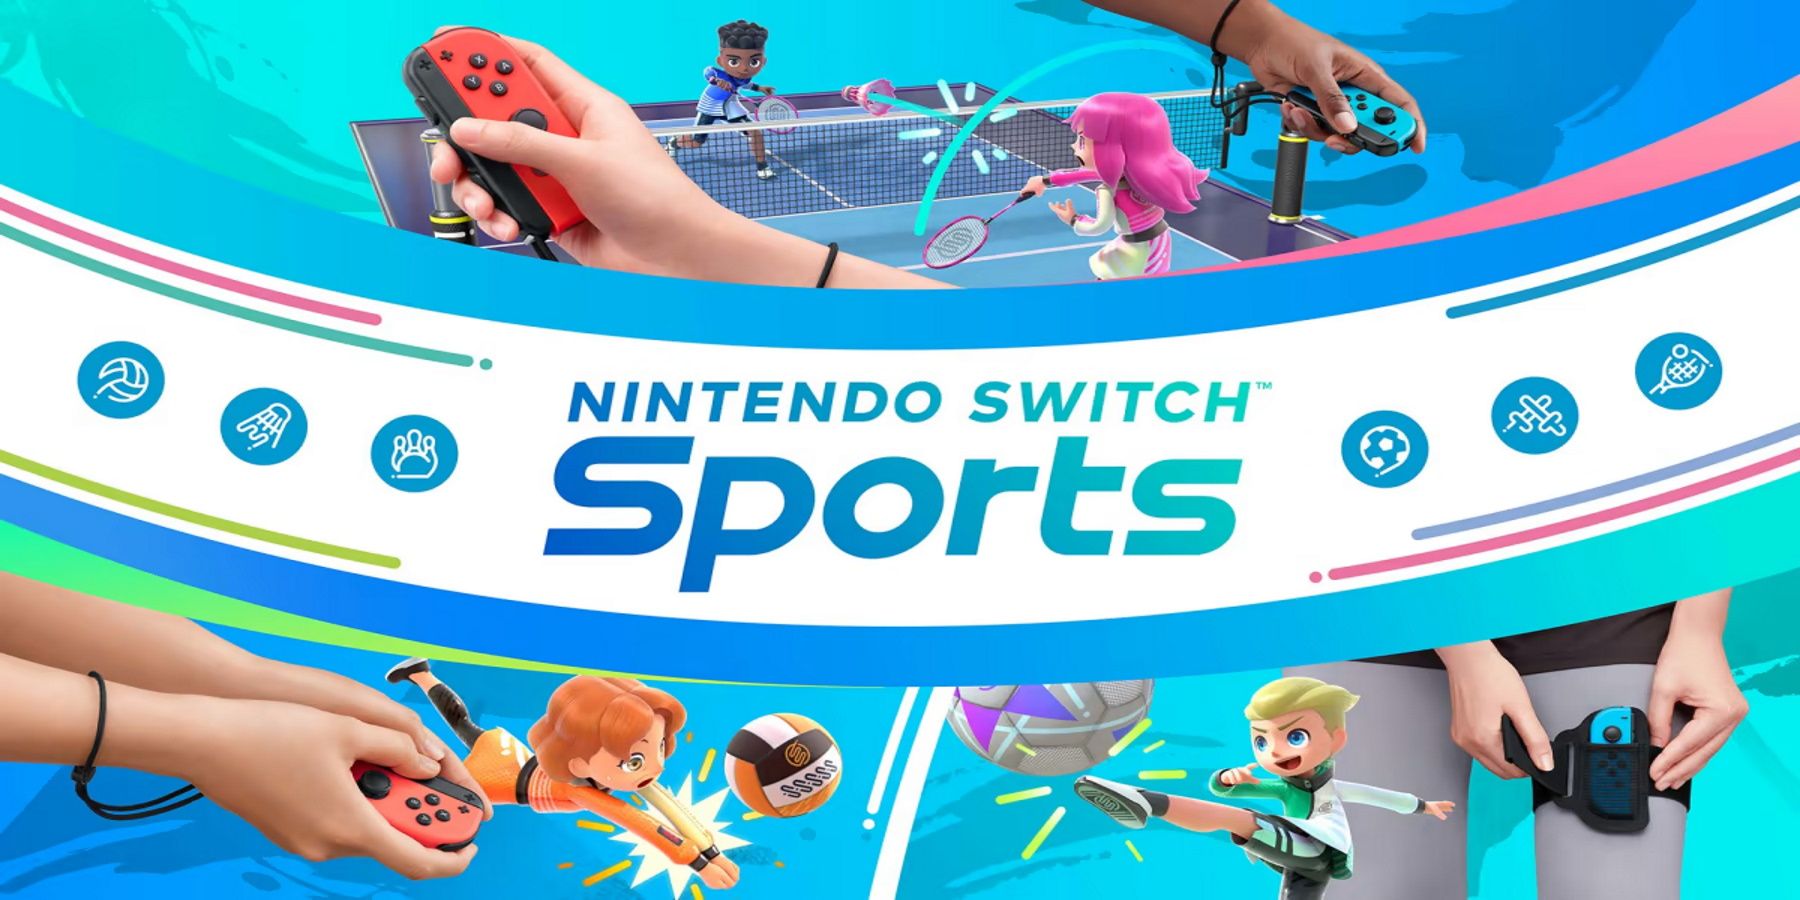 nintendo switch sports box art with characters and real hands